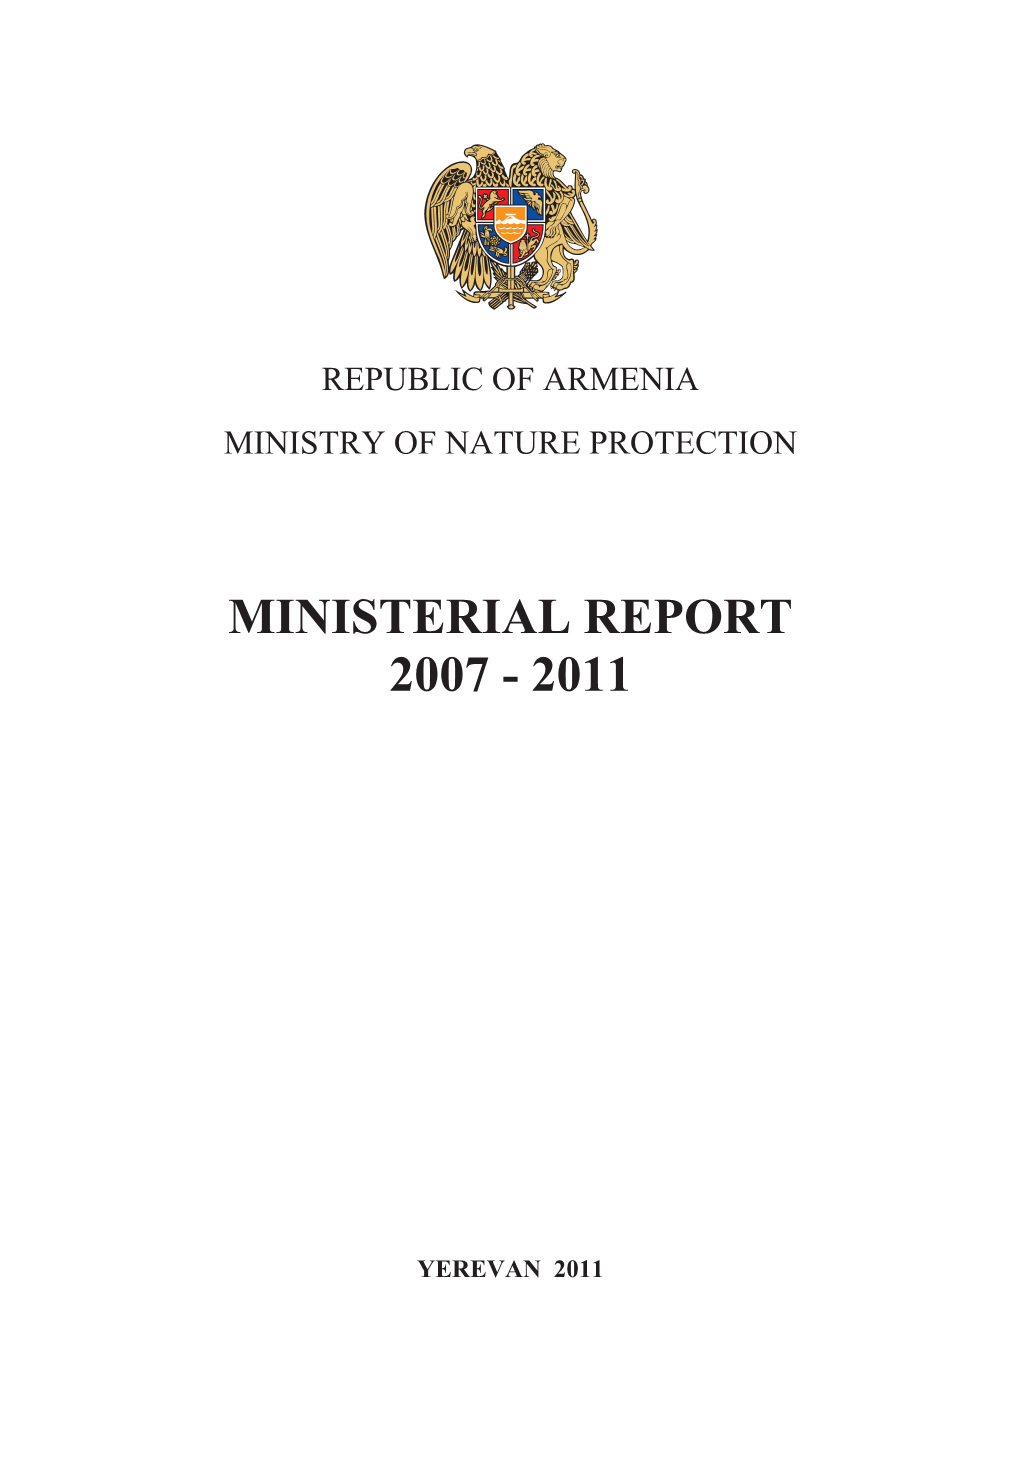 Ministerial Report 2007 - 2011